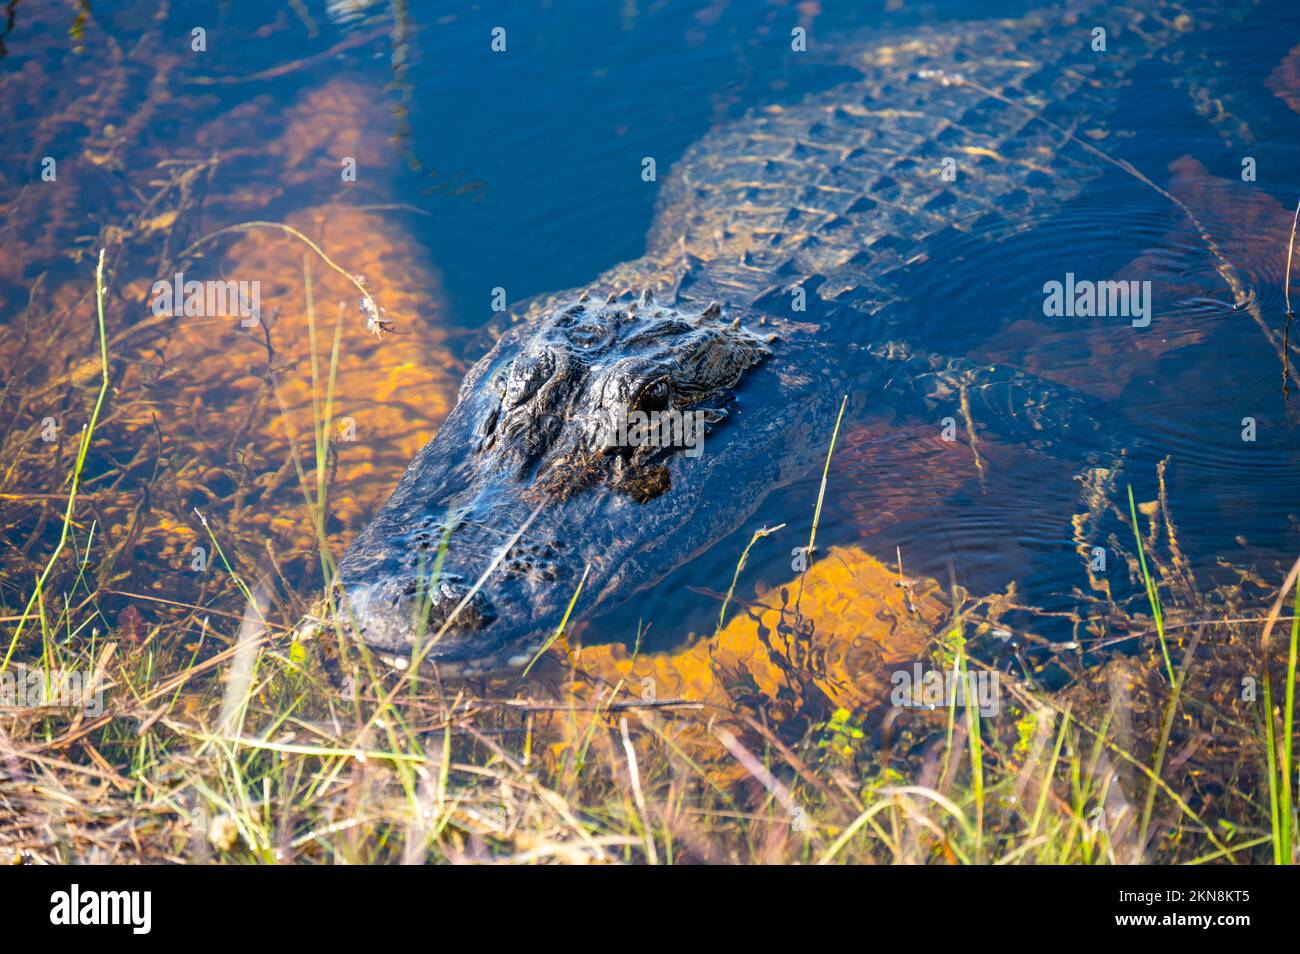 american alligator in Everglades National Park Stock Photo